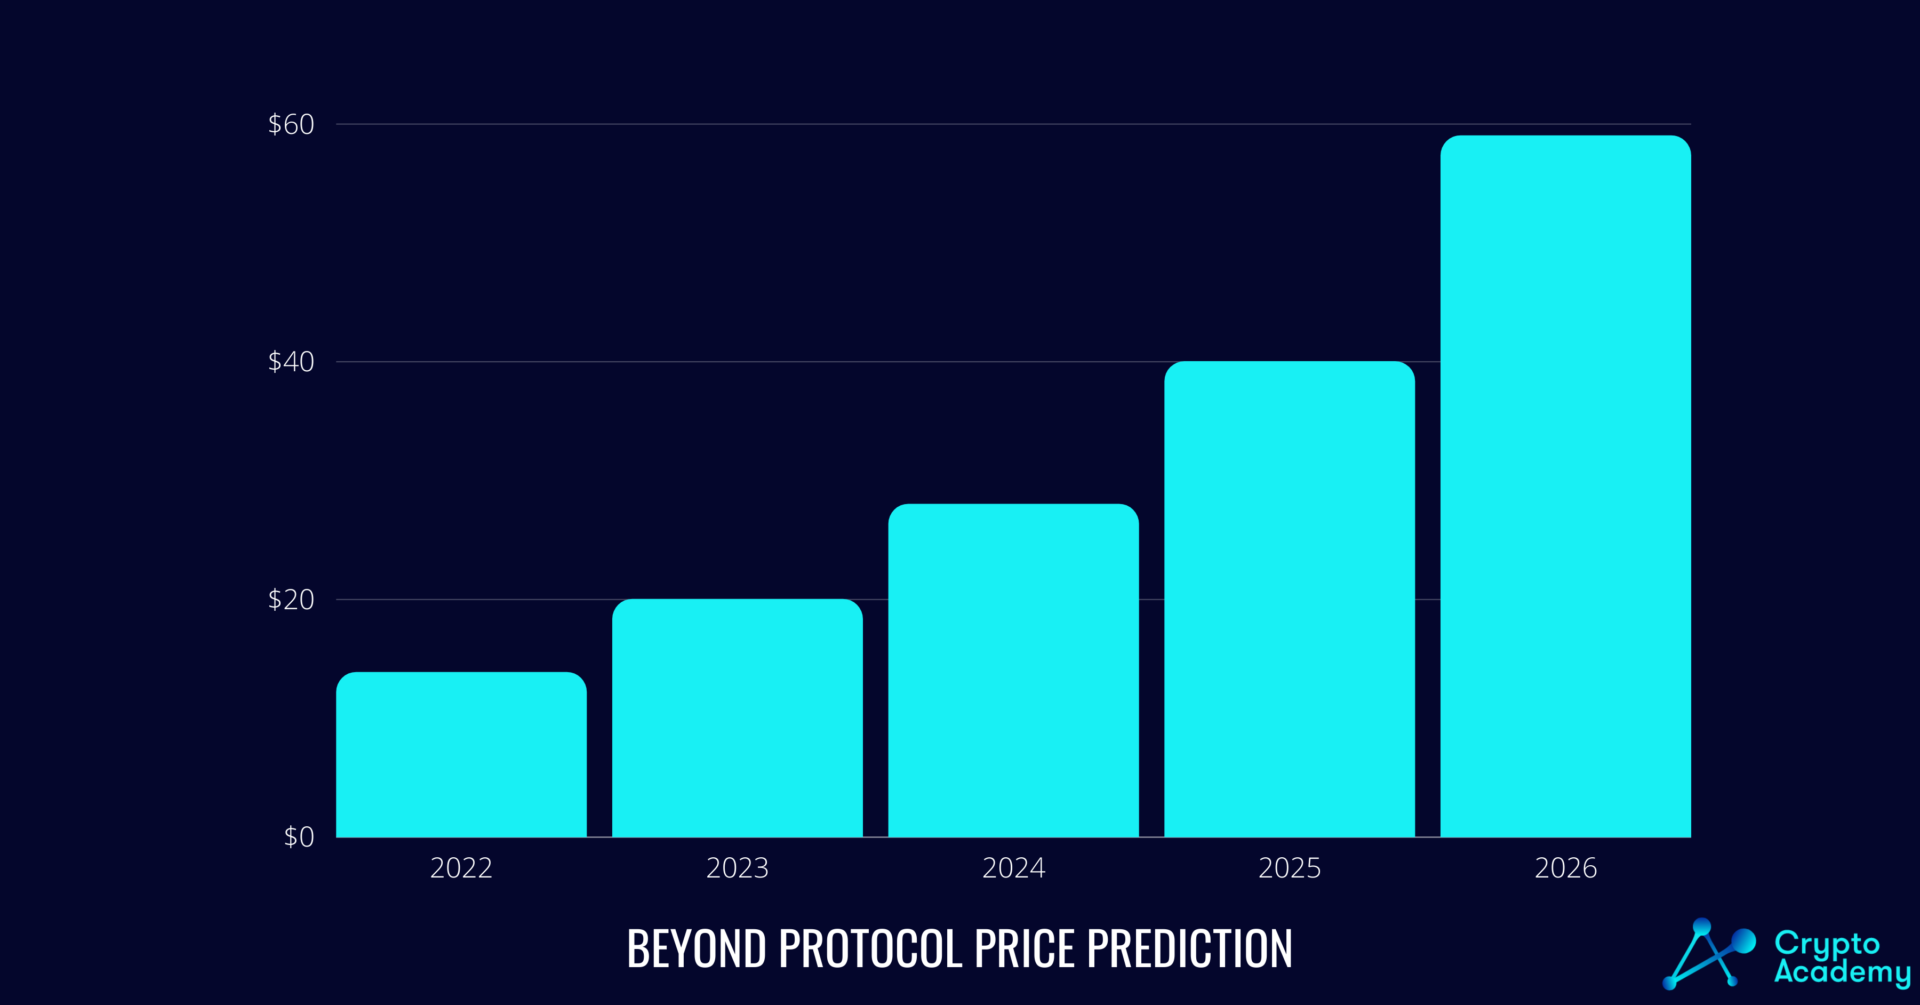 Beyond Protocol price prediction for the upcoming years.